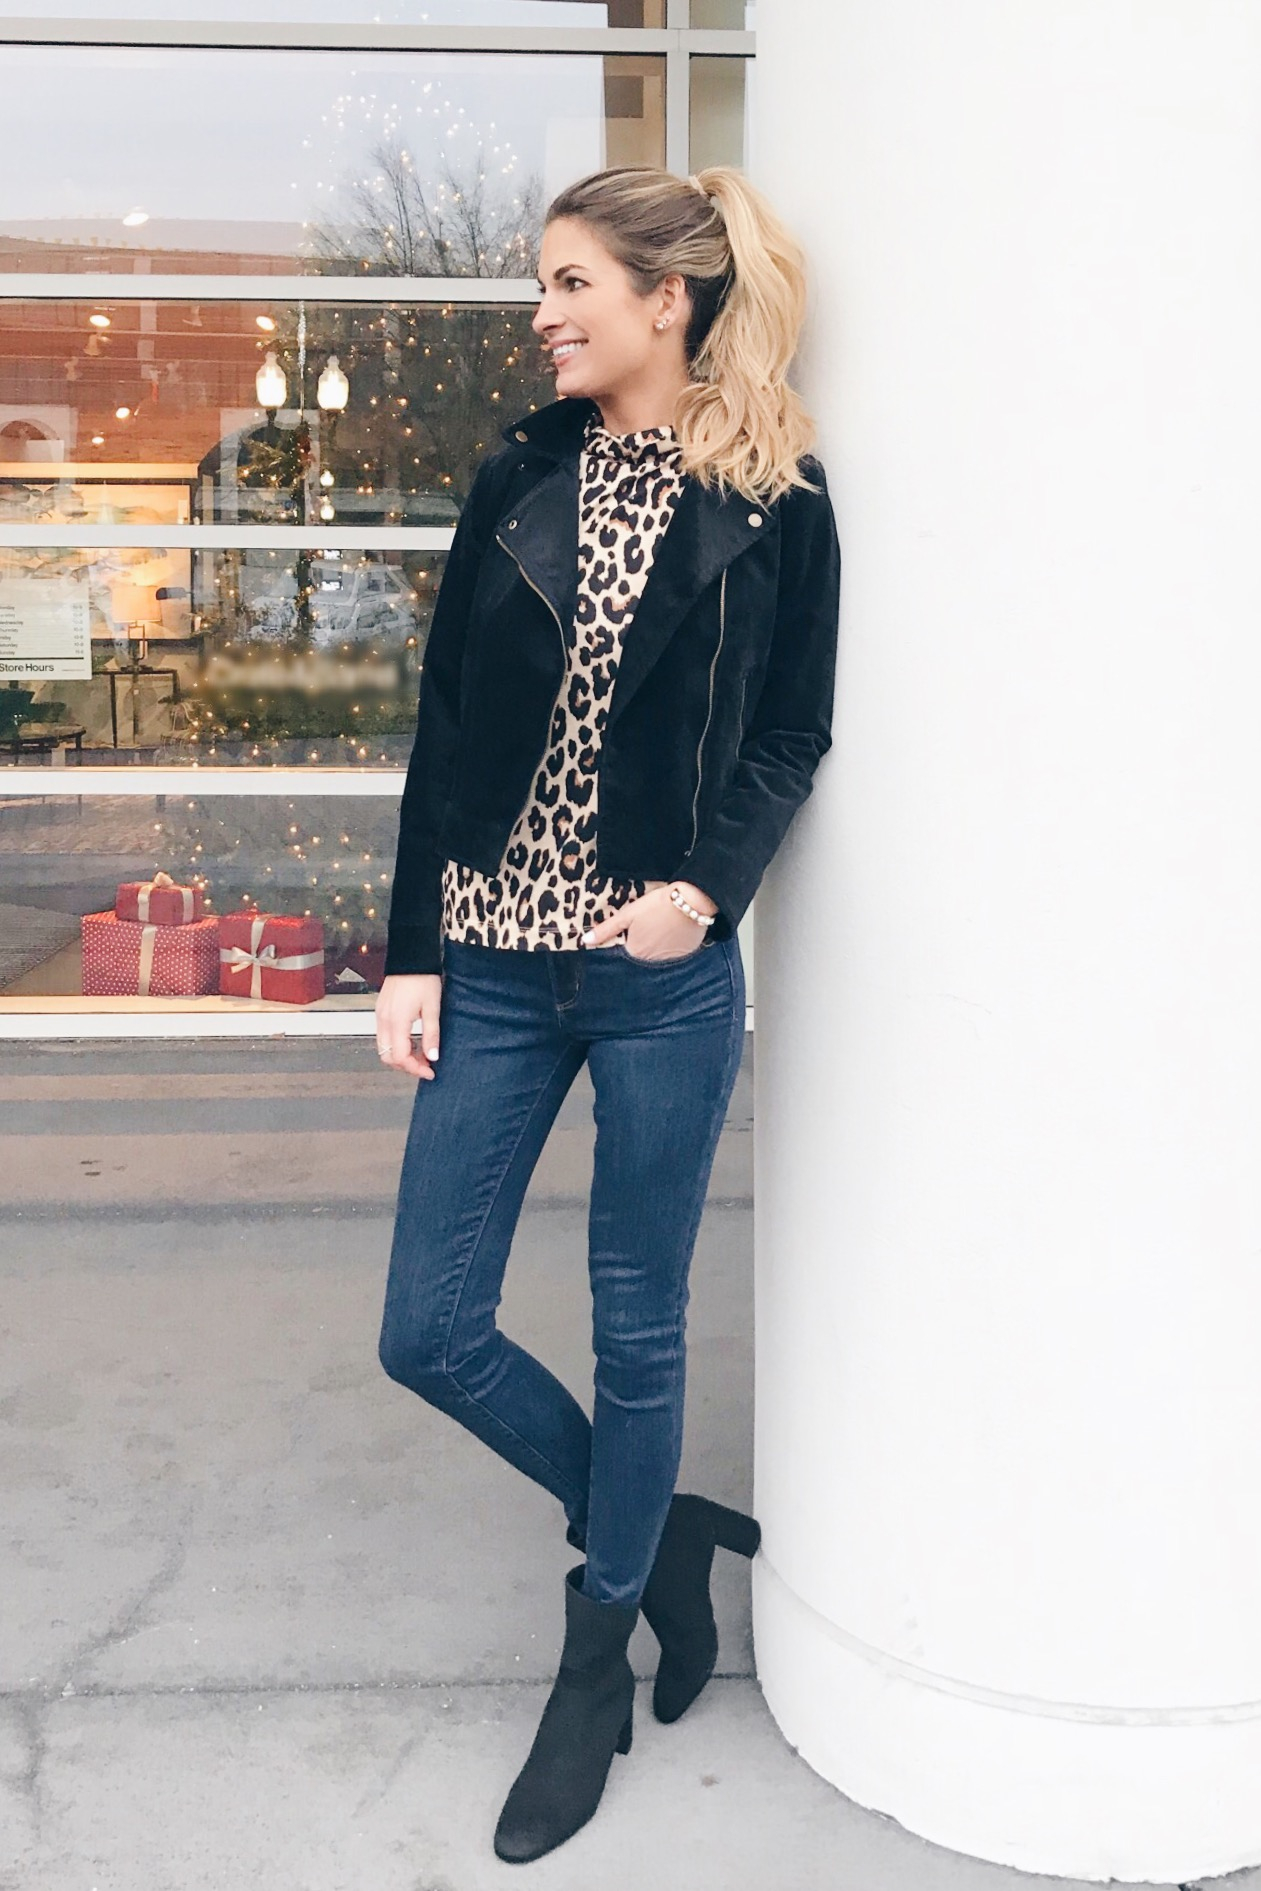  leopard holiday party outfits - moto jacket outfit on pinteresting plans fashion blog